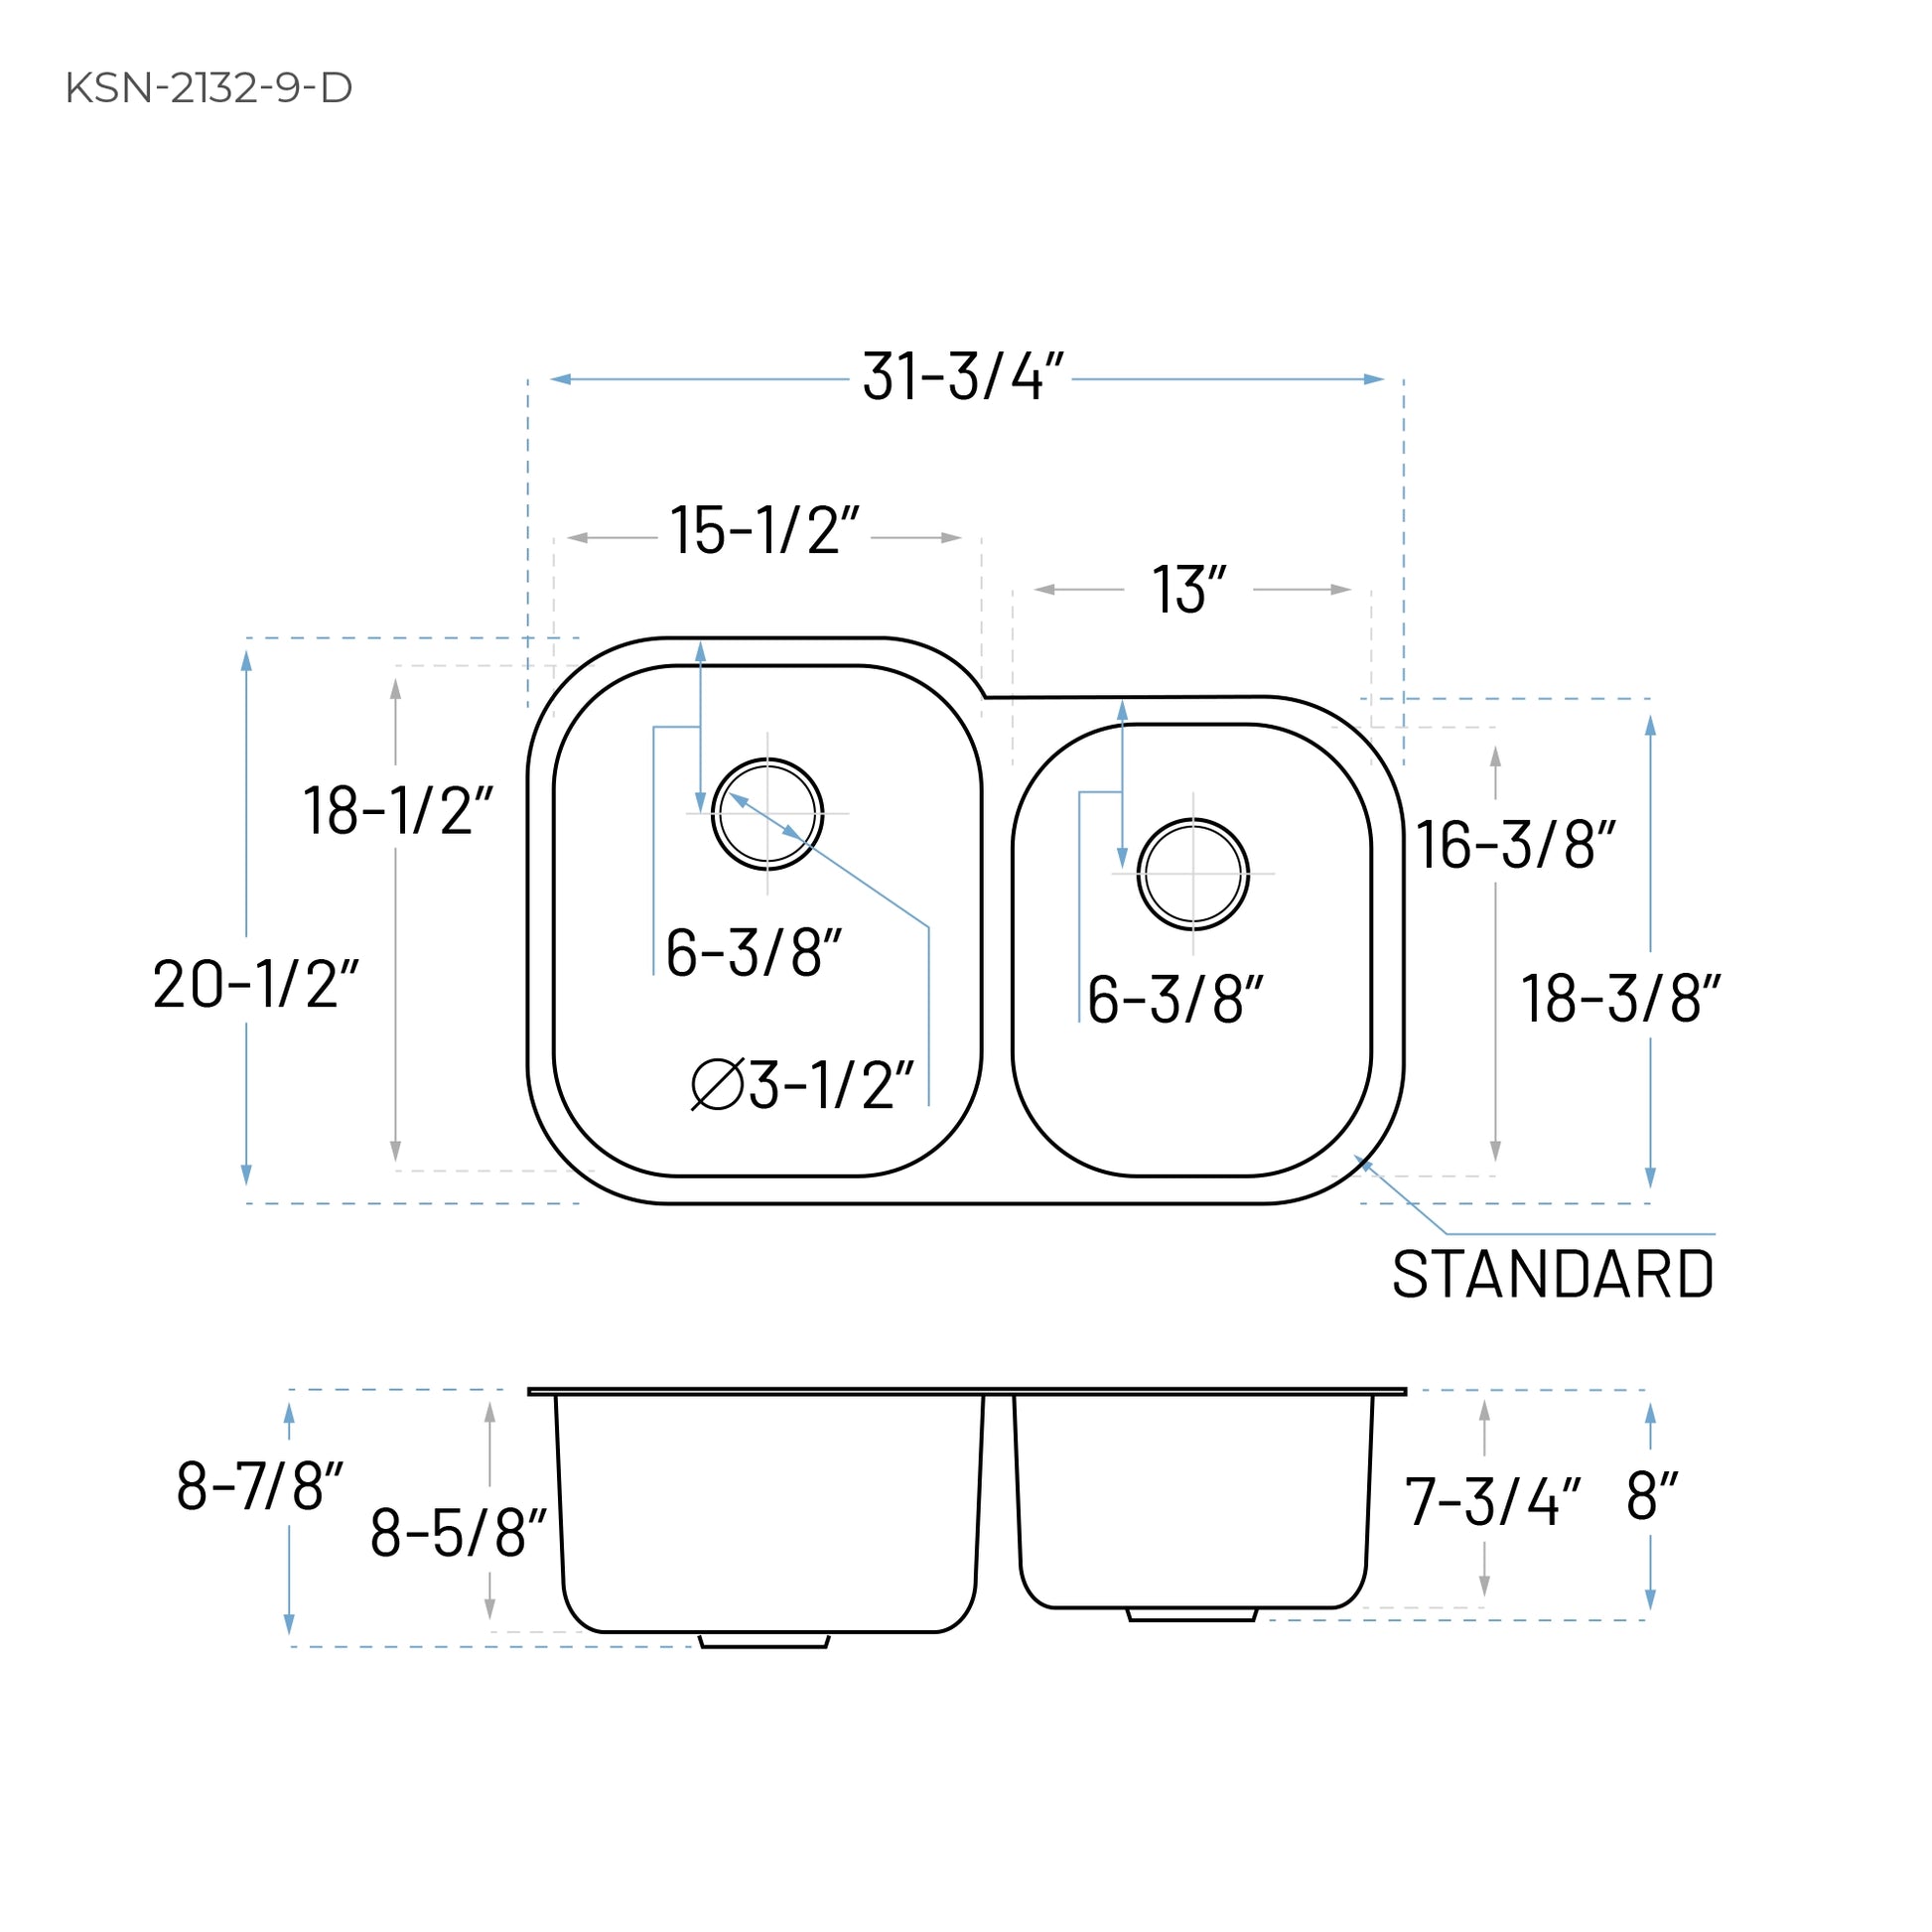 Technical Drawing of a D-offset Double bowl undermount kitchen sink